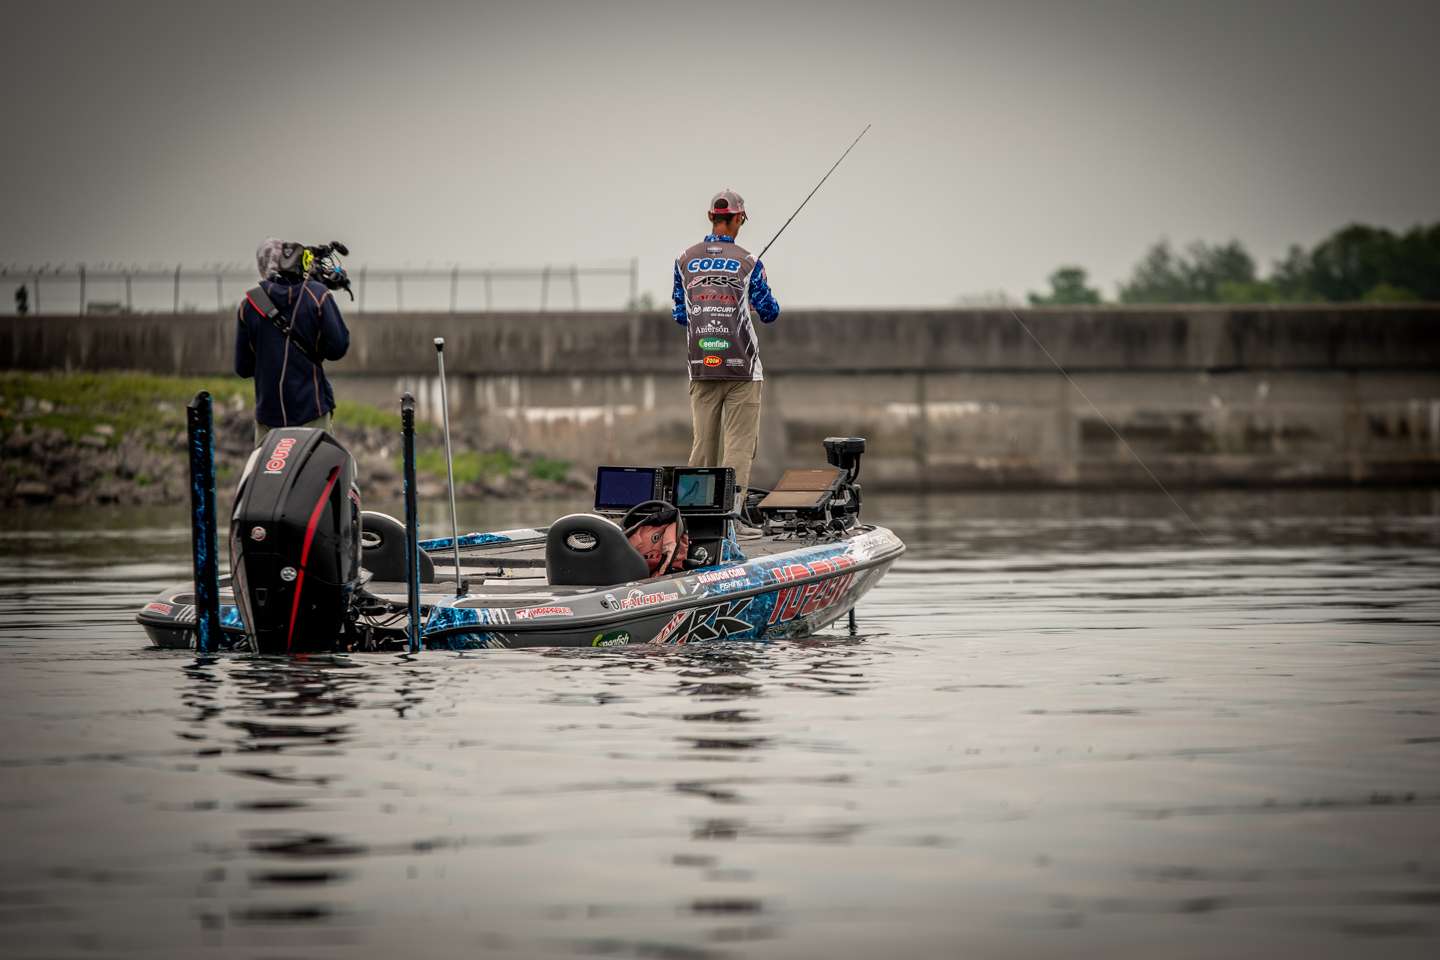 Watch as South Carolina pro Brandon Cobb puts on a show on Day 3 of the Farmers Insurance Bassmaster Elite at St. Lawrence River.